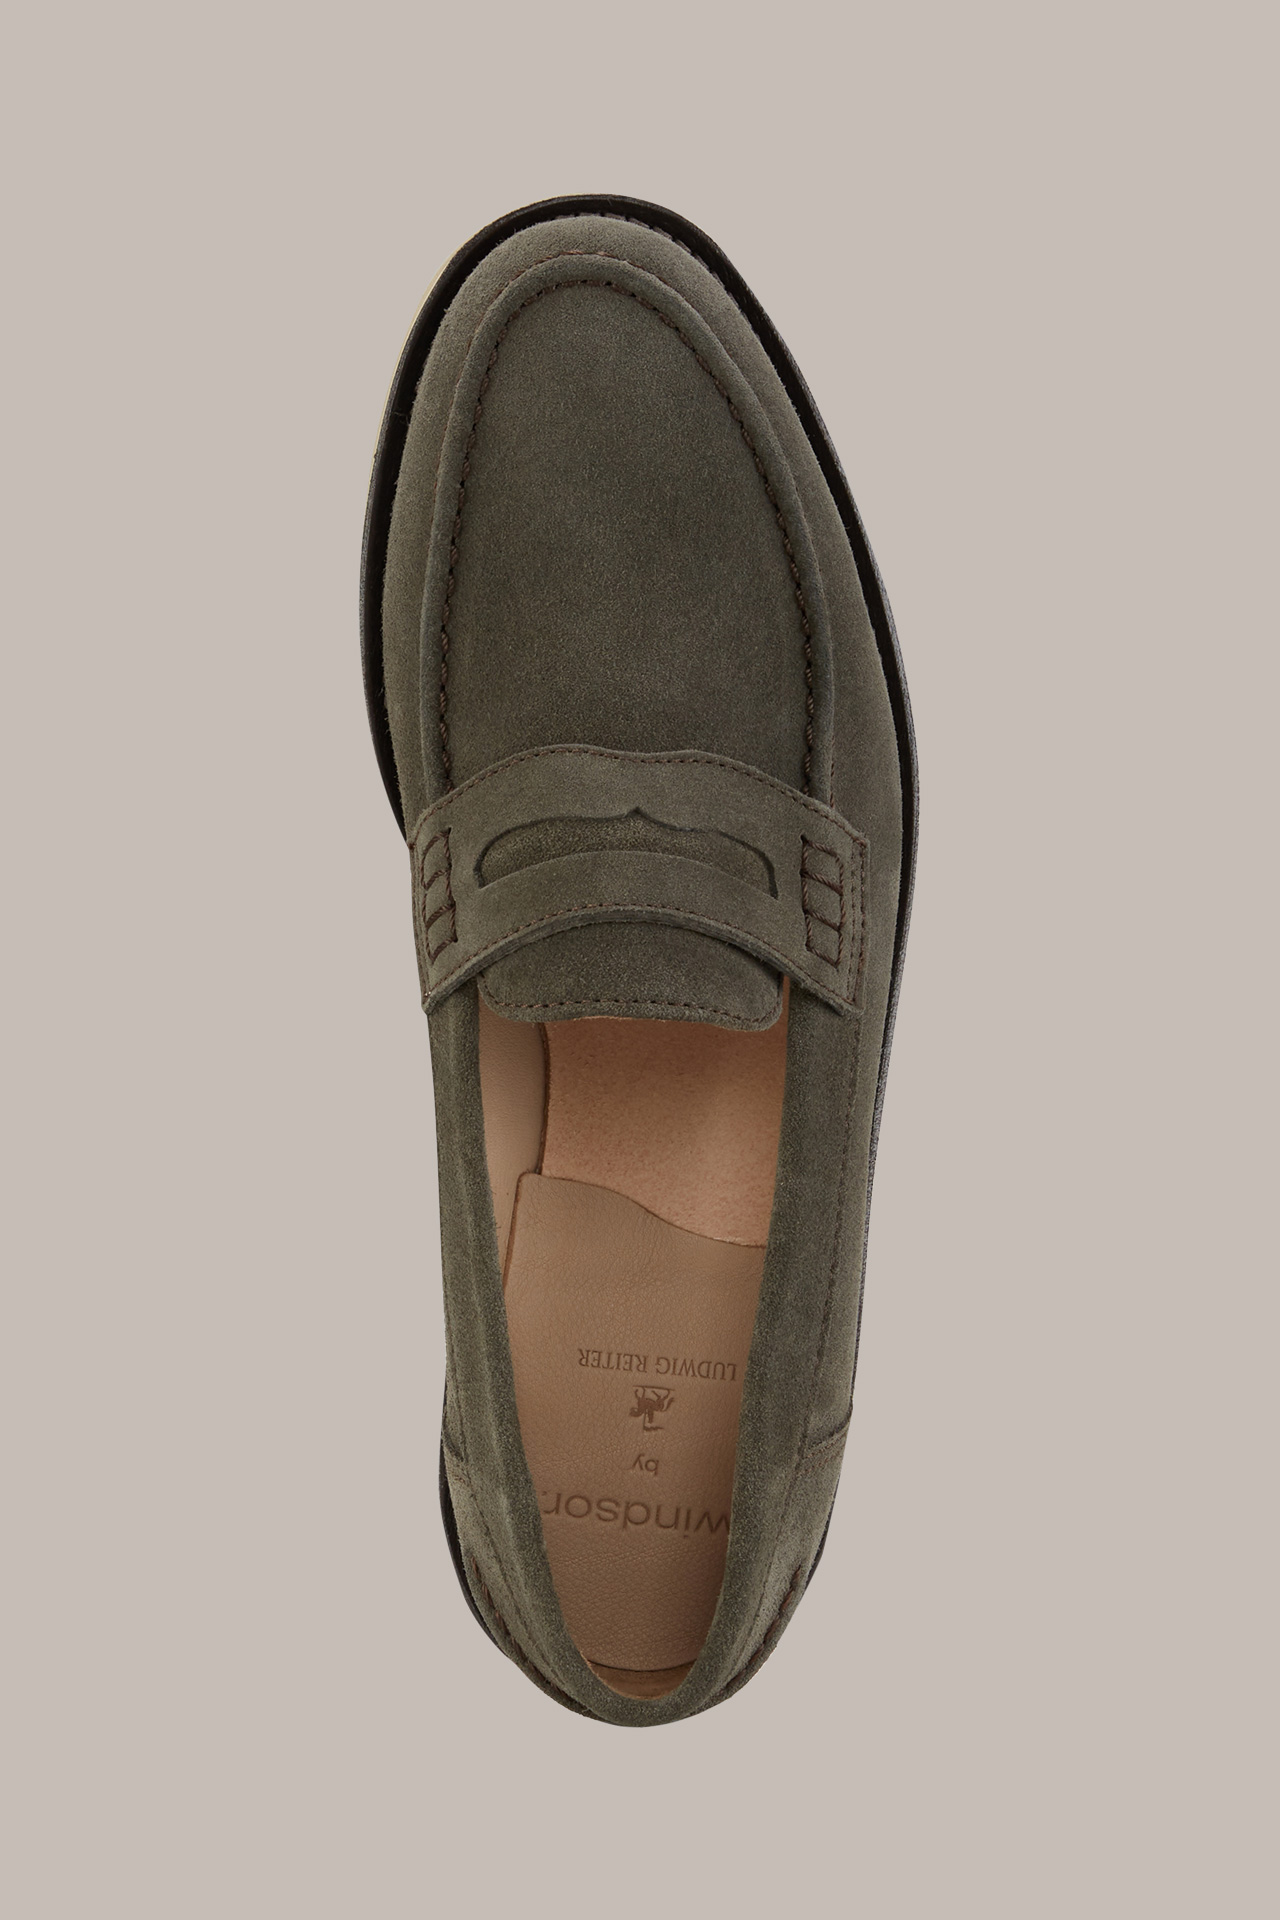 Loafers by Ludwig Reiter in Olive